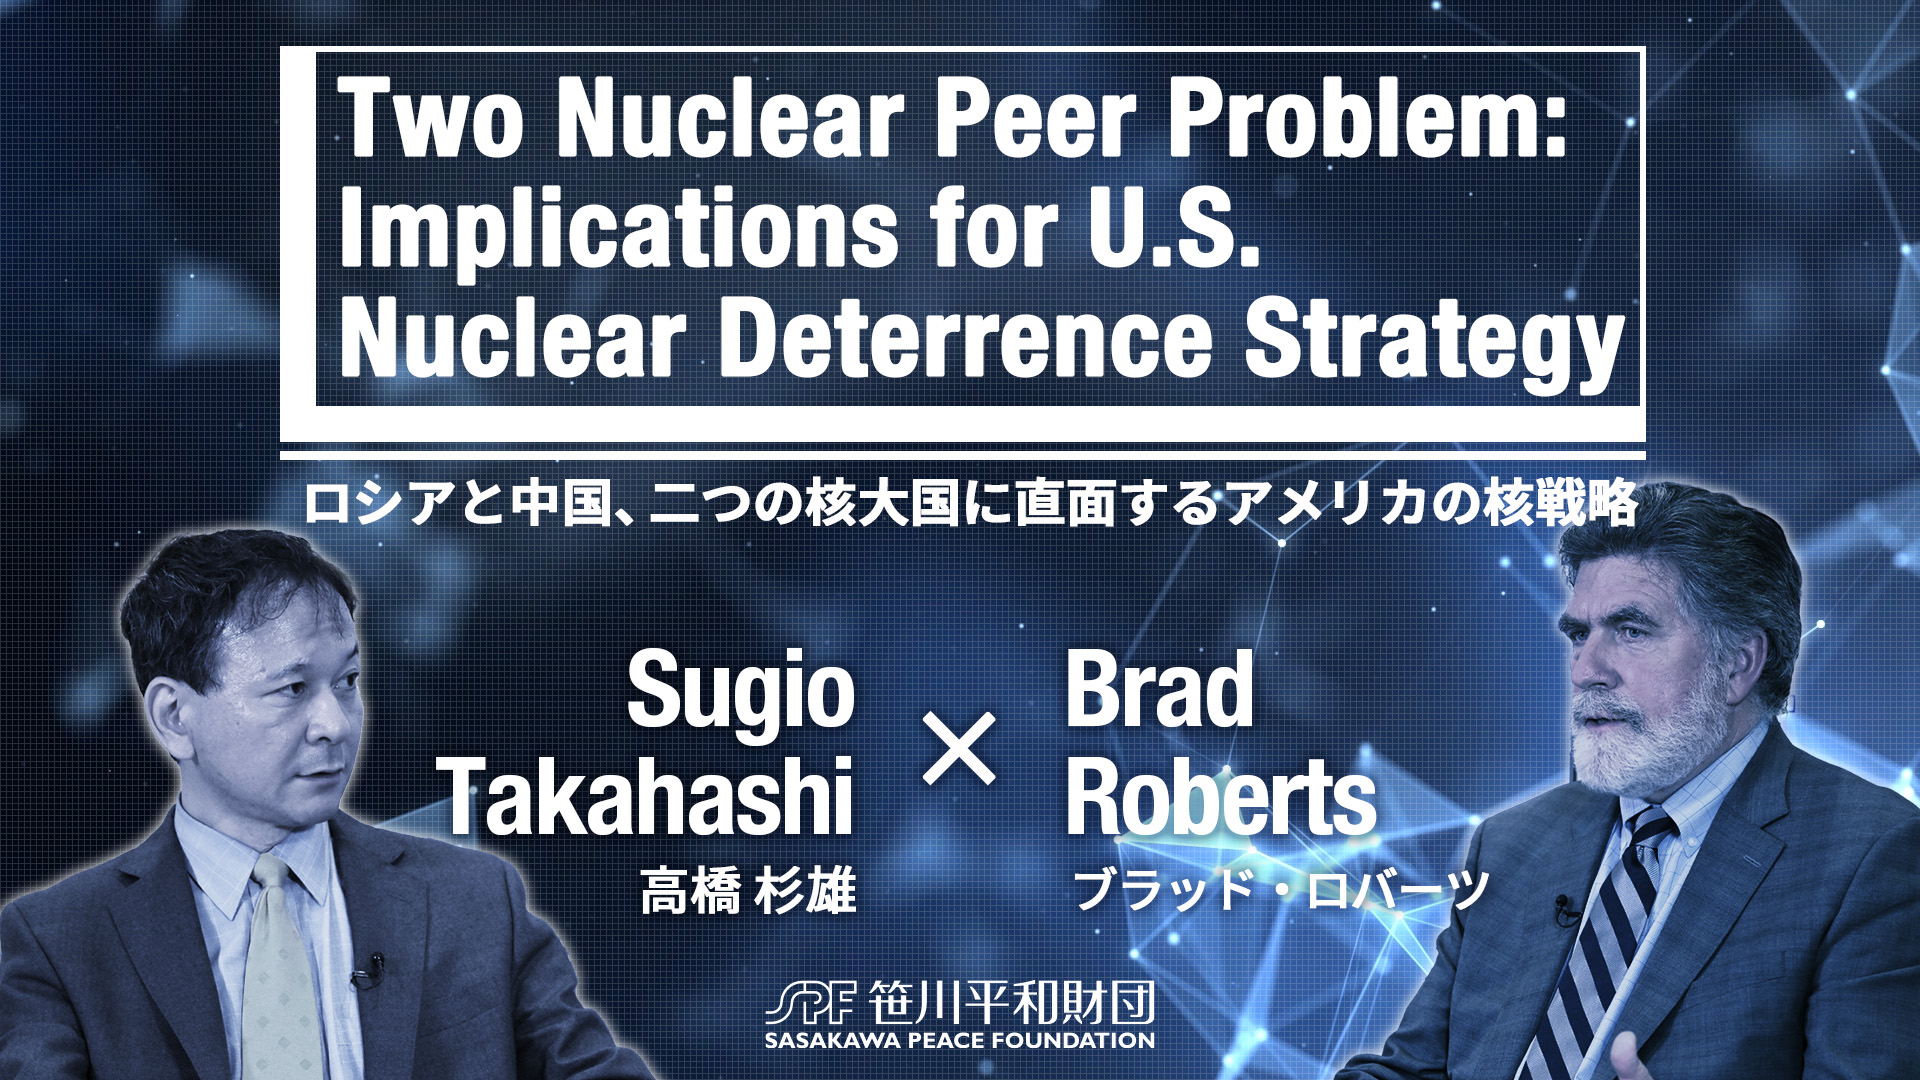 Two Nuclear Peer Problem: Implications for U.S. Nuclear Deterrence Strategy